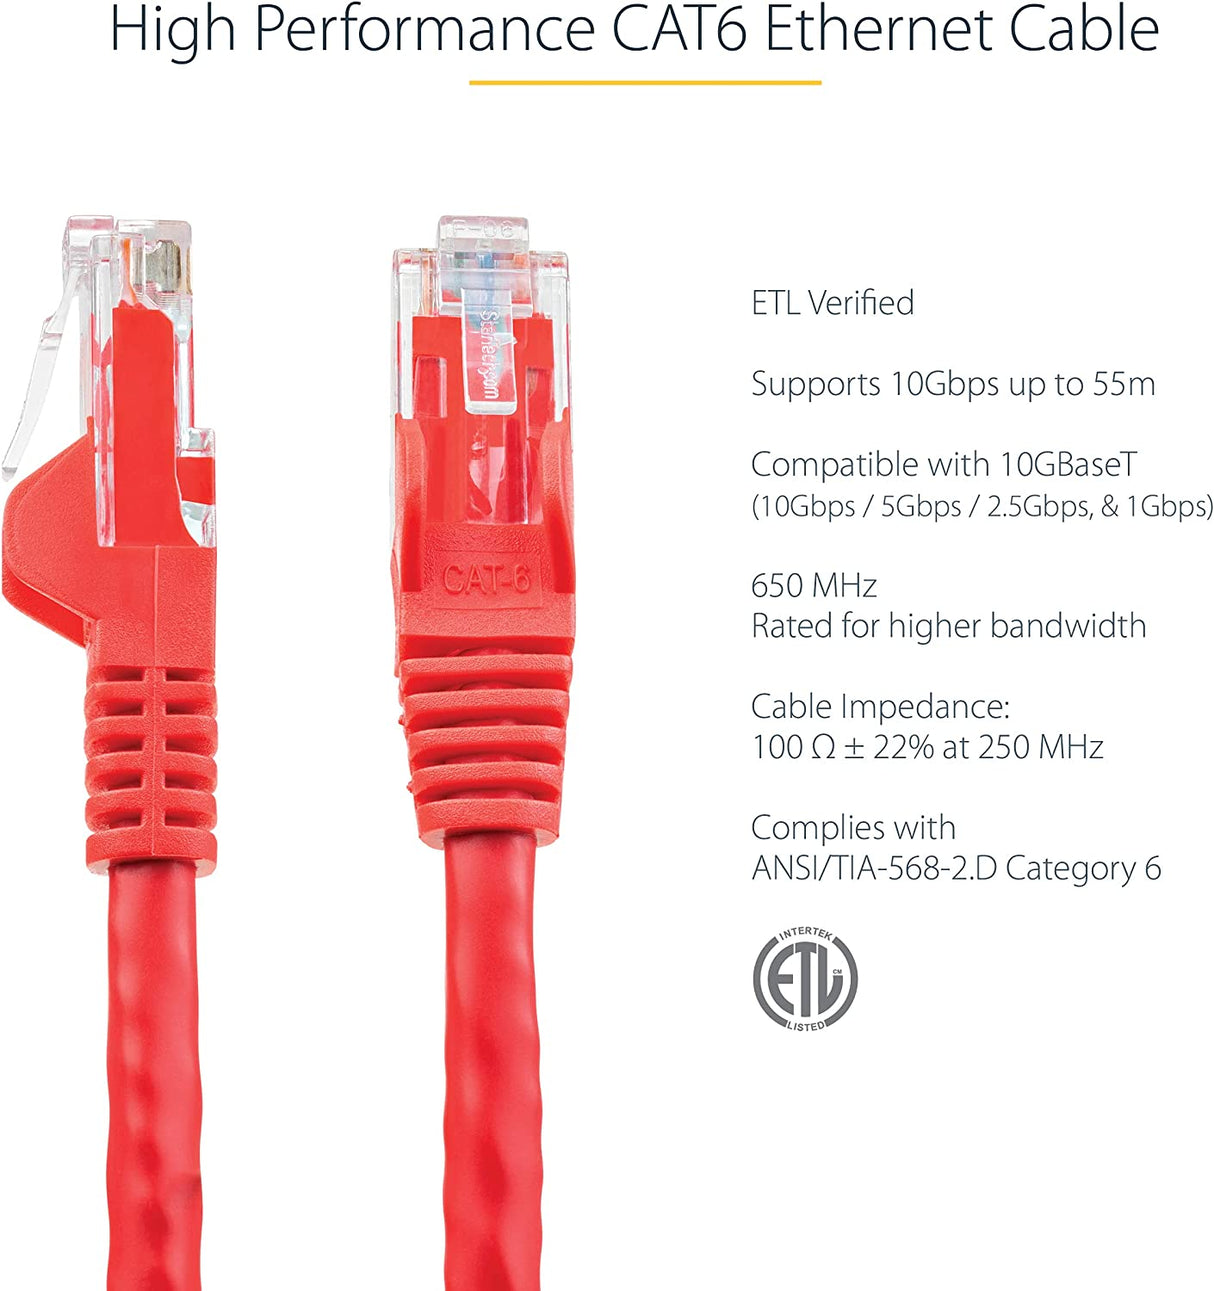 StarTech.com 25ft CAT6 Ethernet Cable - Red CAT 6 Gigabit Ethernet Wire -650MHz 100W PoE RJ45 UTP Category 6 Network/Patch Cord Snagless w/Strain Relief Fluke Tested UL/TIA Certified (N6PATCH25RD) Red 25 ft / 7.6 m 1 Pack